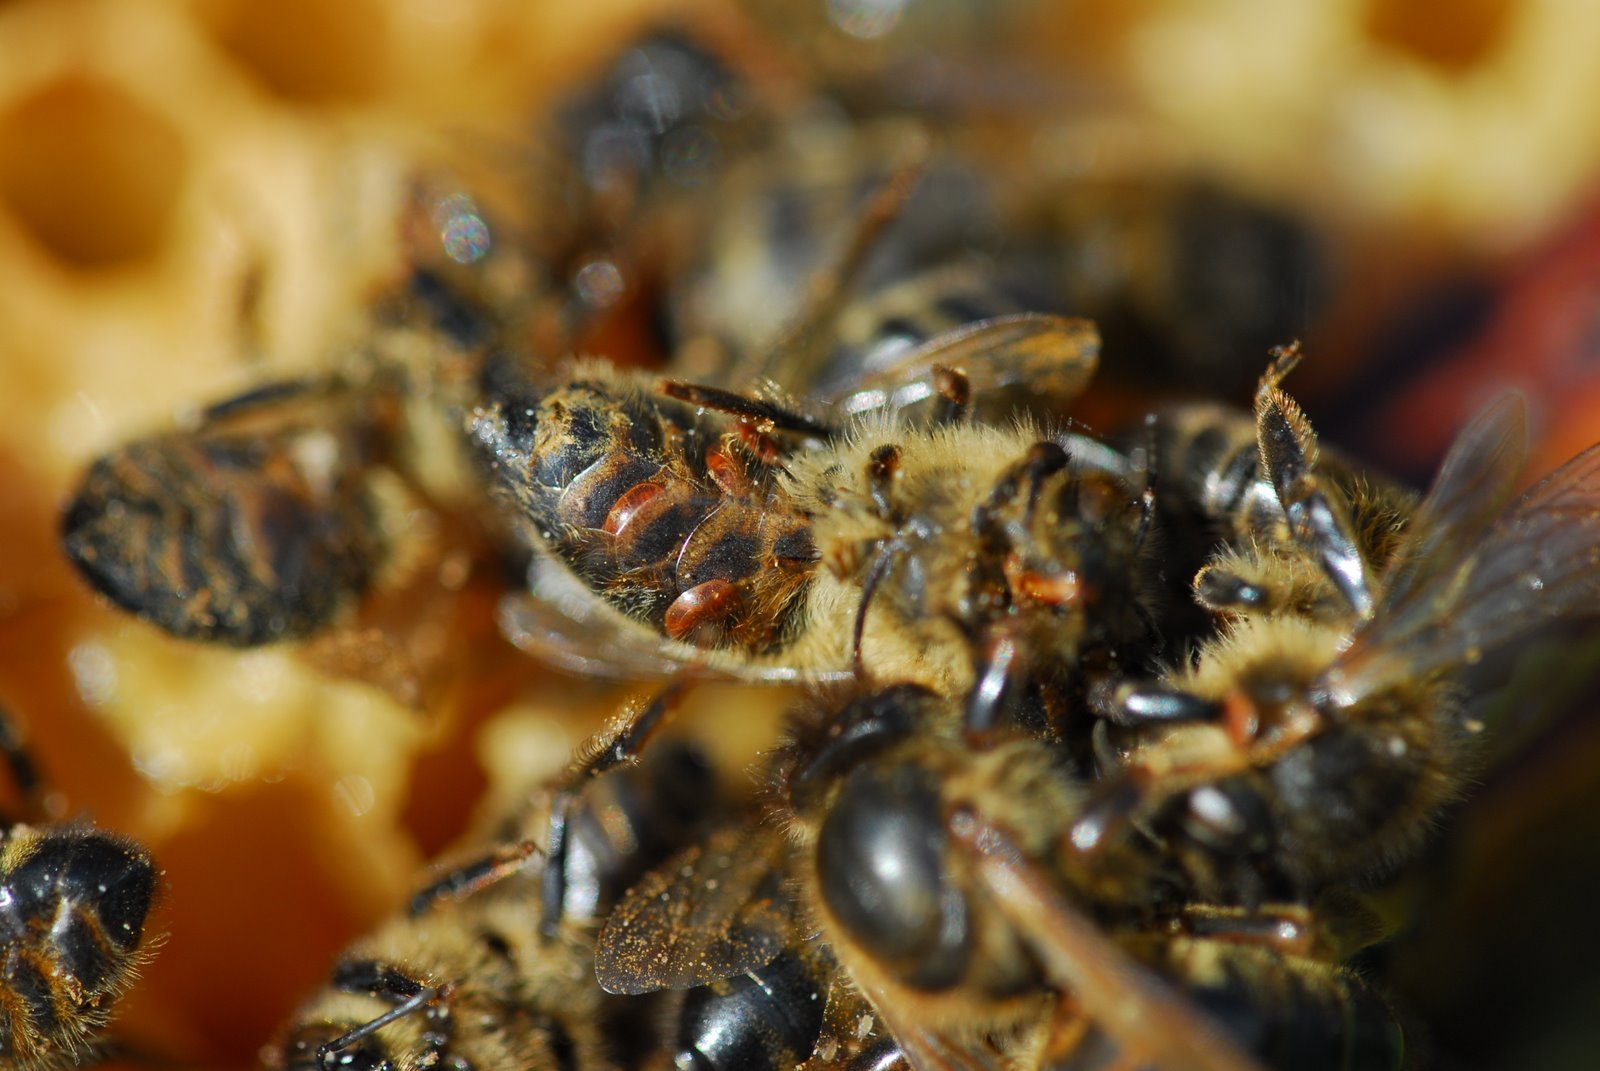 Dead bees with varroa mites between the segments of the abdomen of the bees